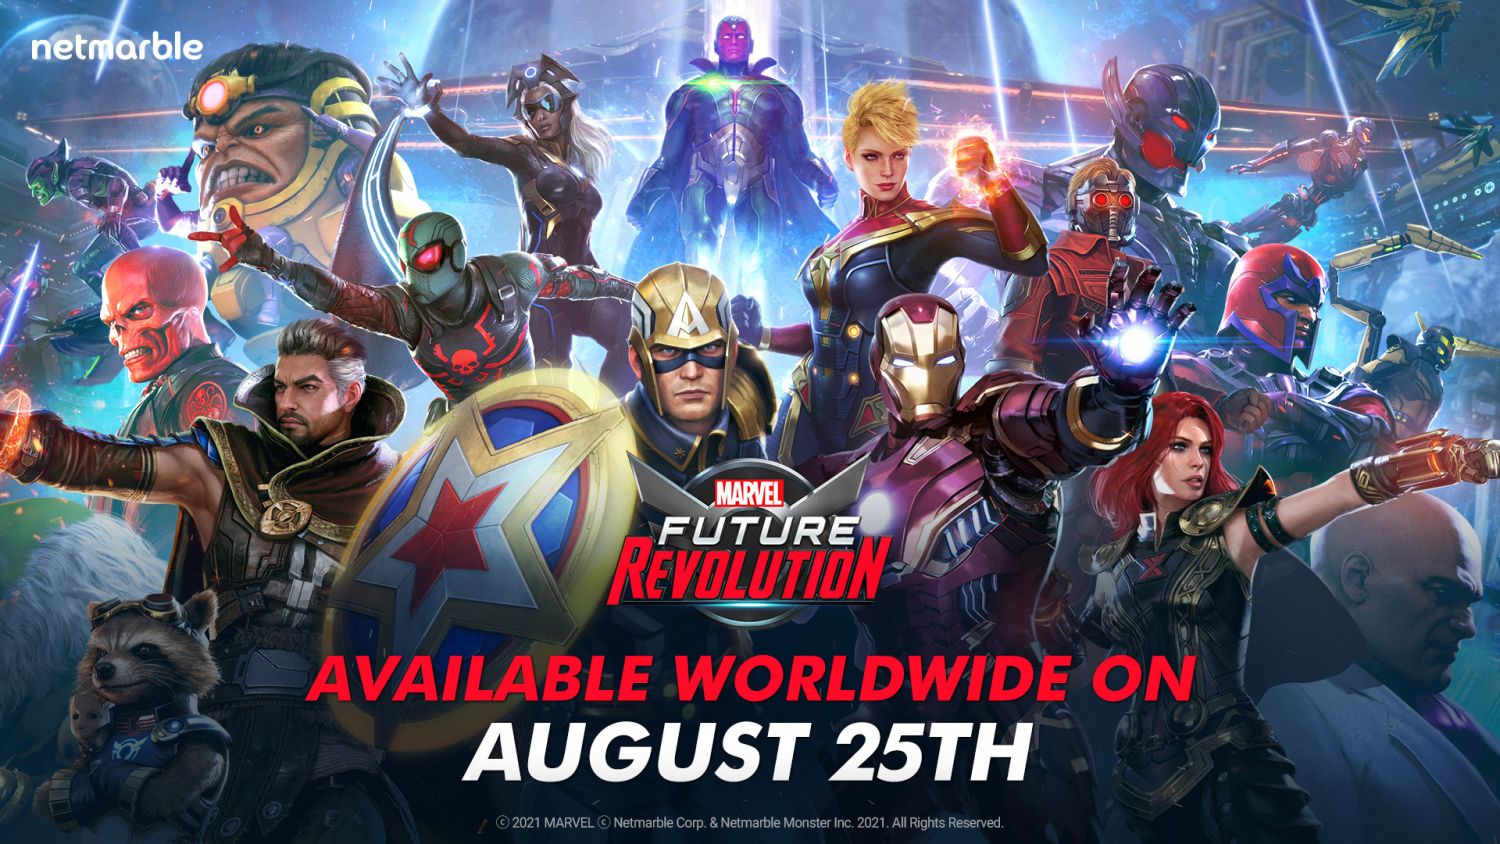 Marvel Future Revolution is an openworld RPG that brings the